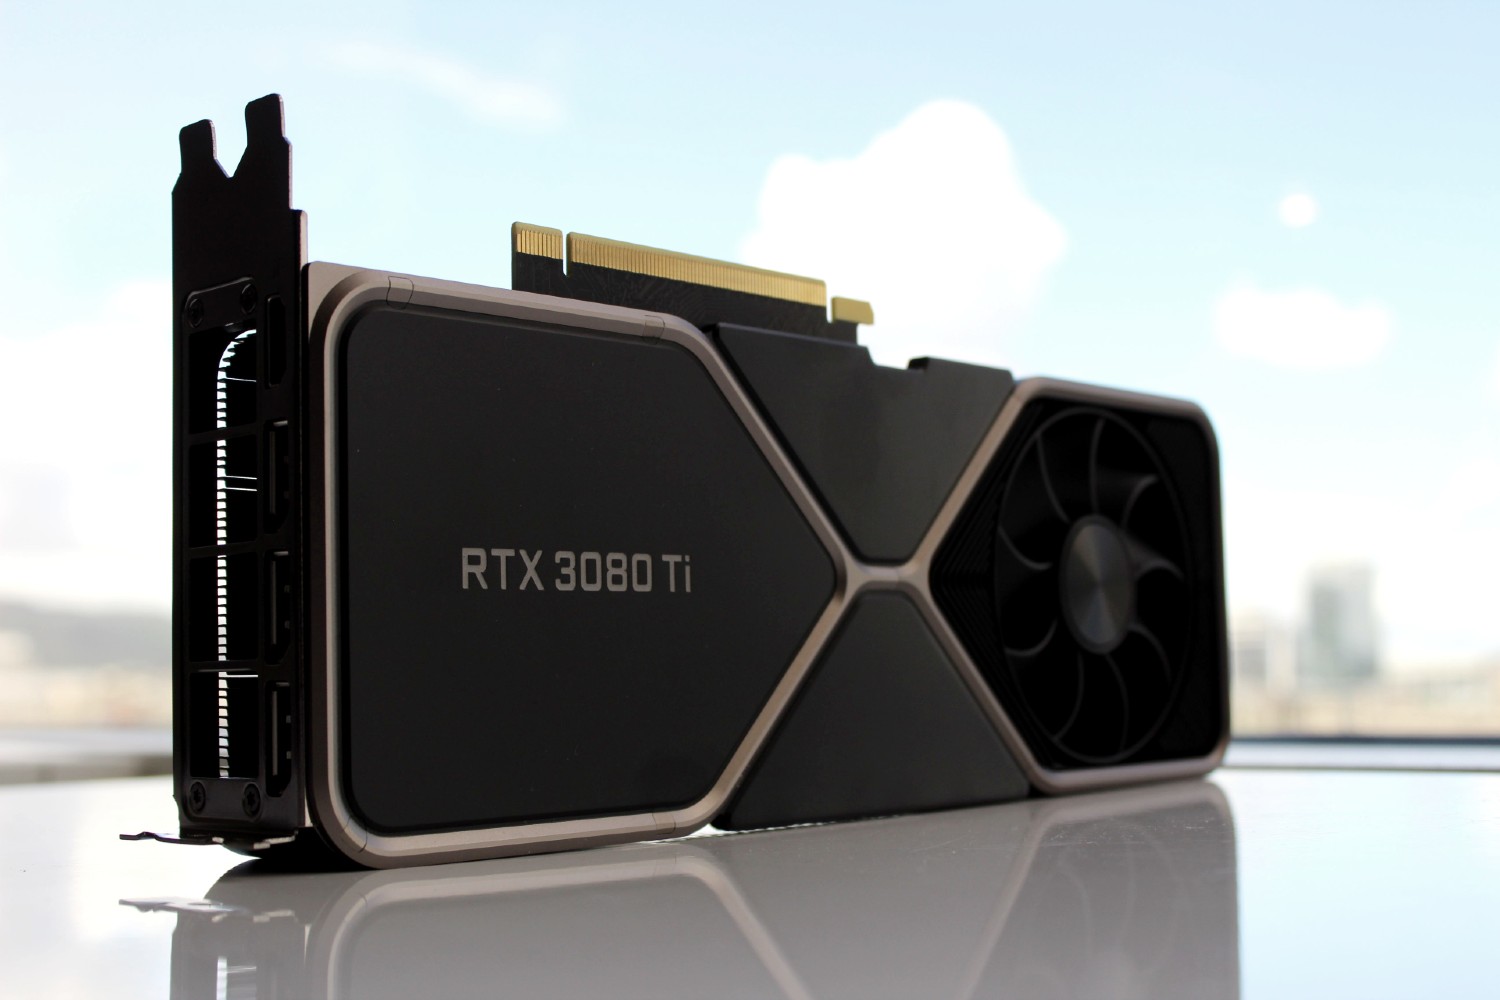 Nvidia RTX 3080 Ti Review: 4K Performance At a Price | Digital Trends